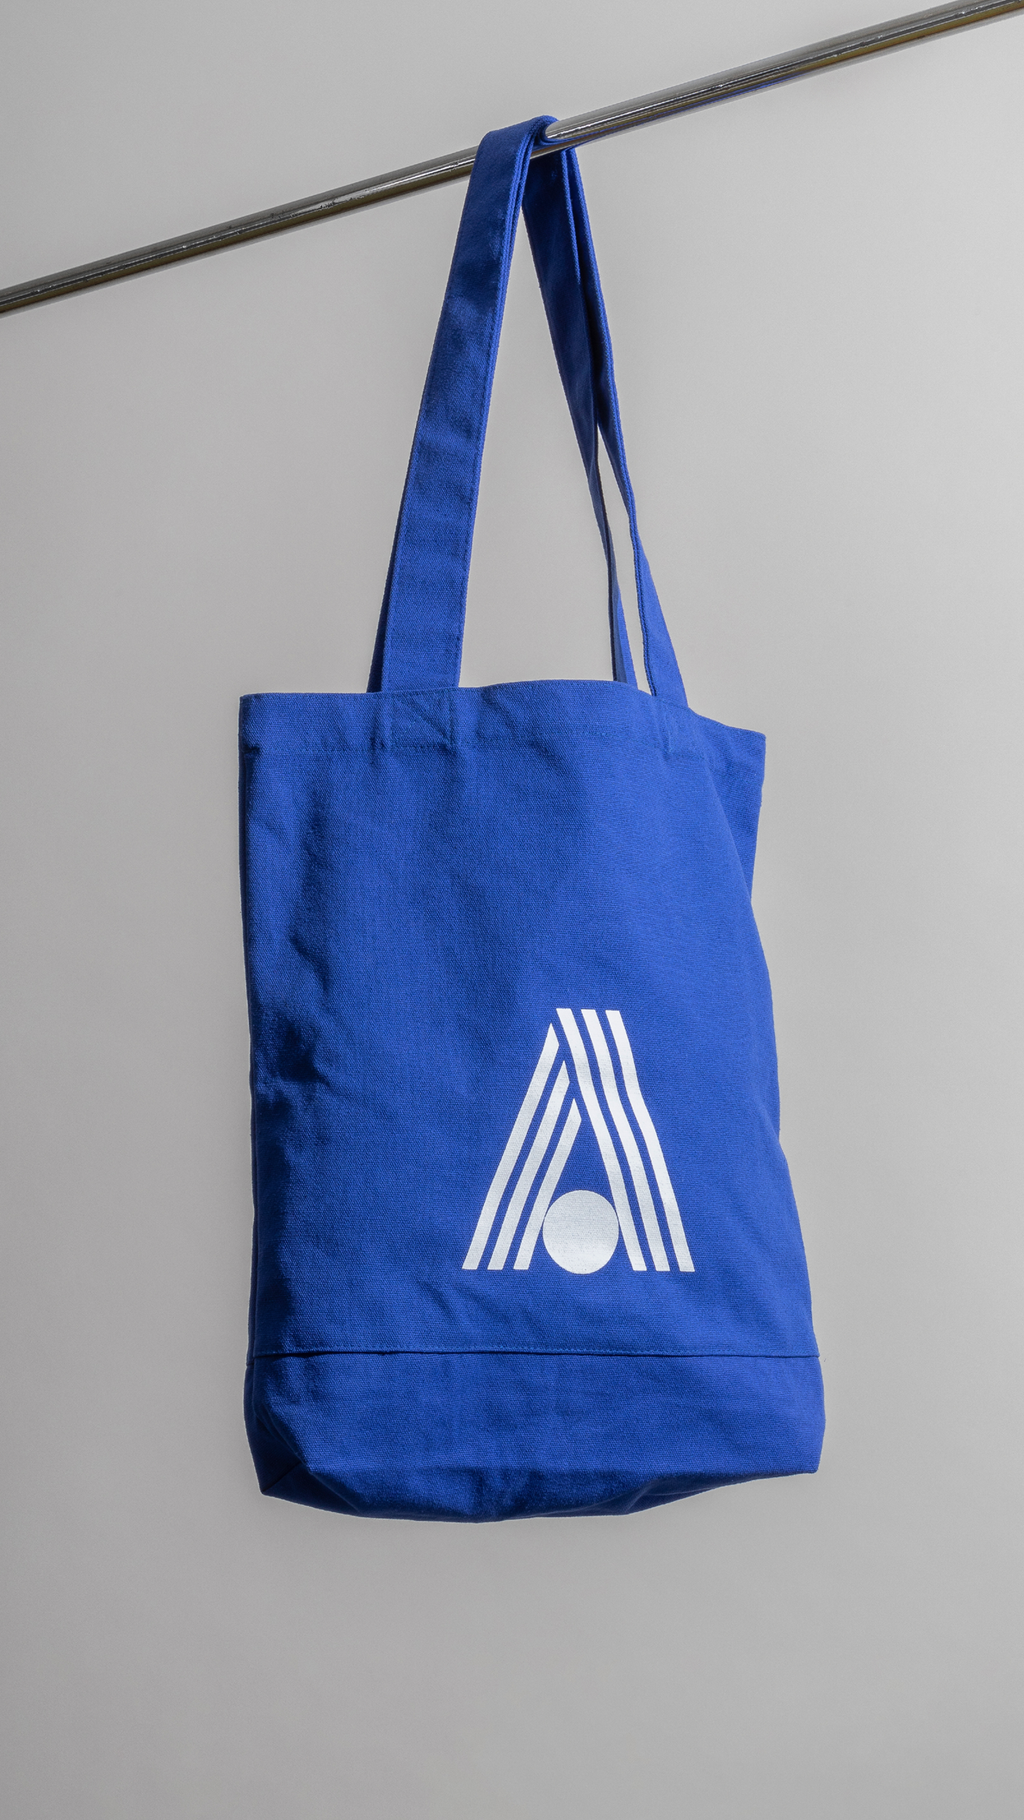 Almighty Tote Bag